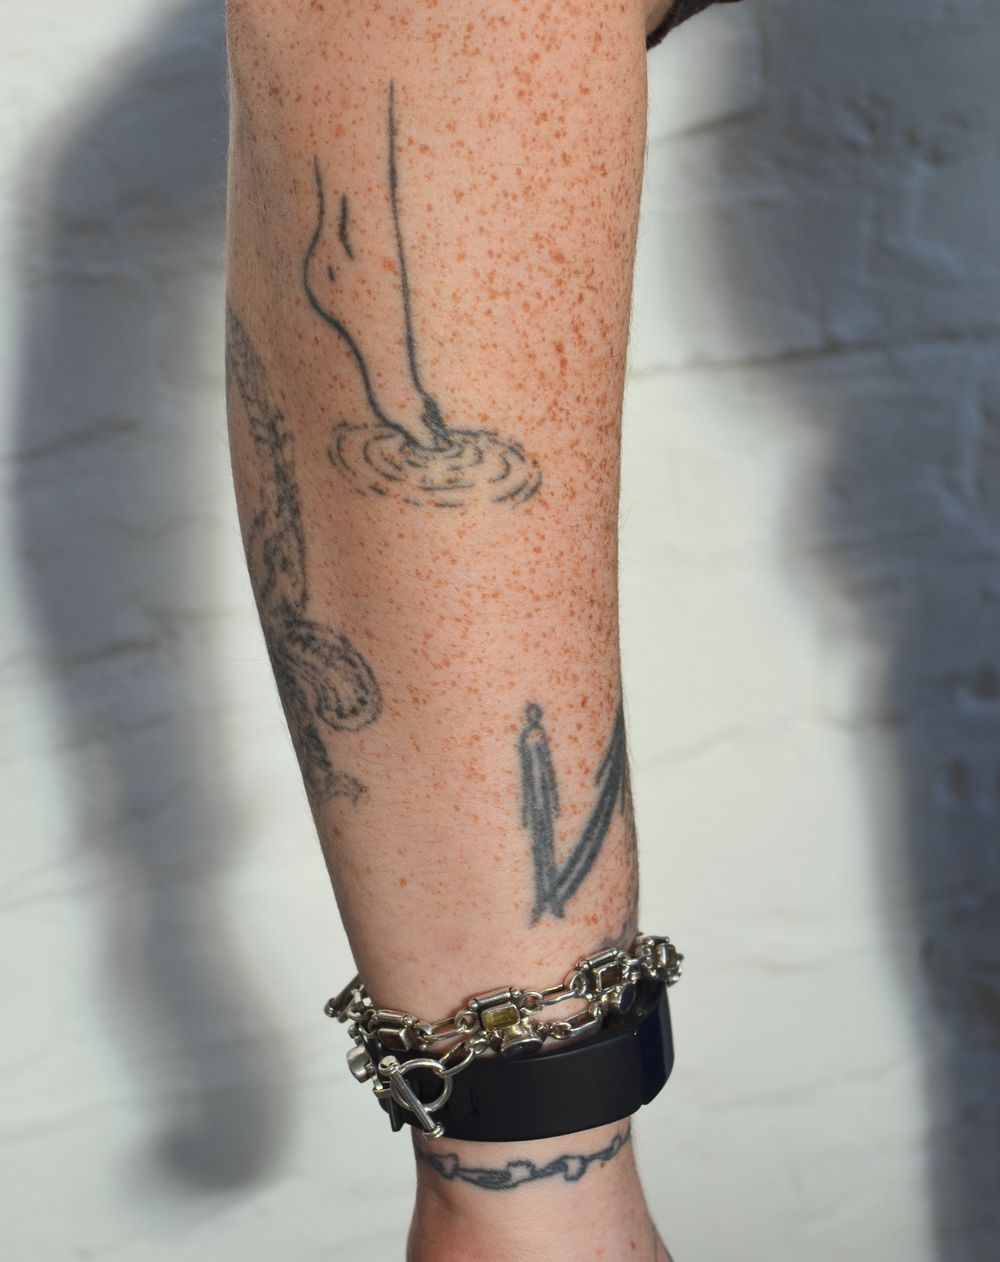 How effective is tattoo removal